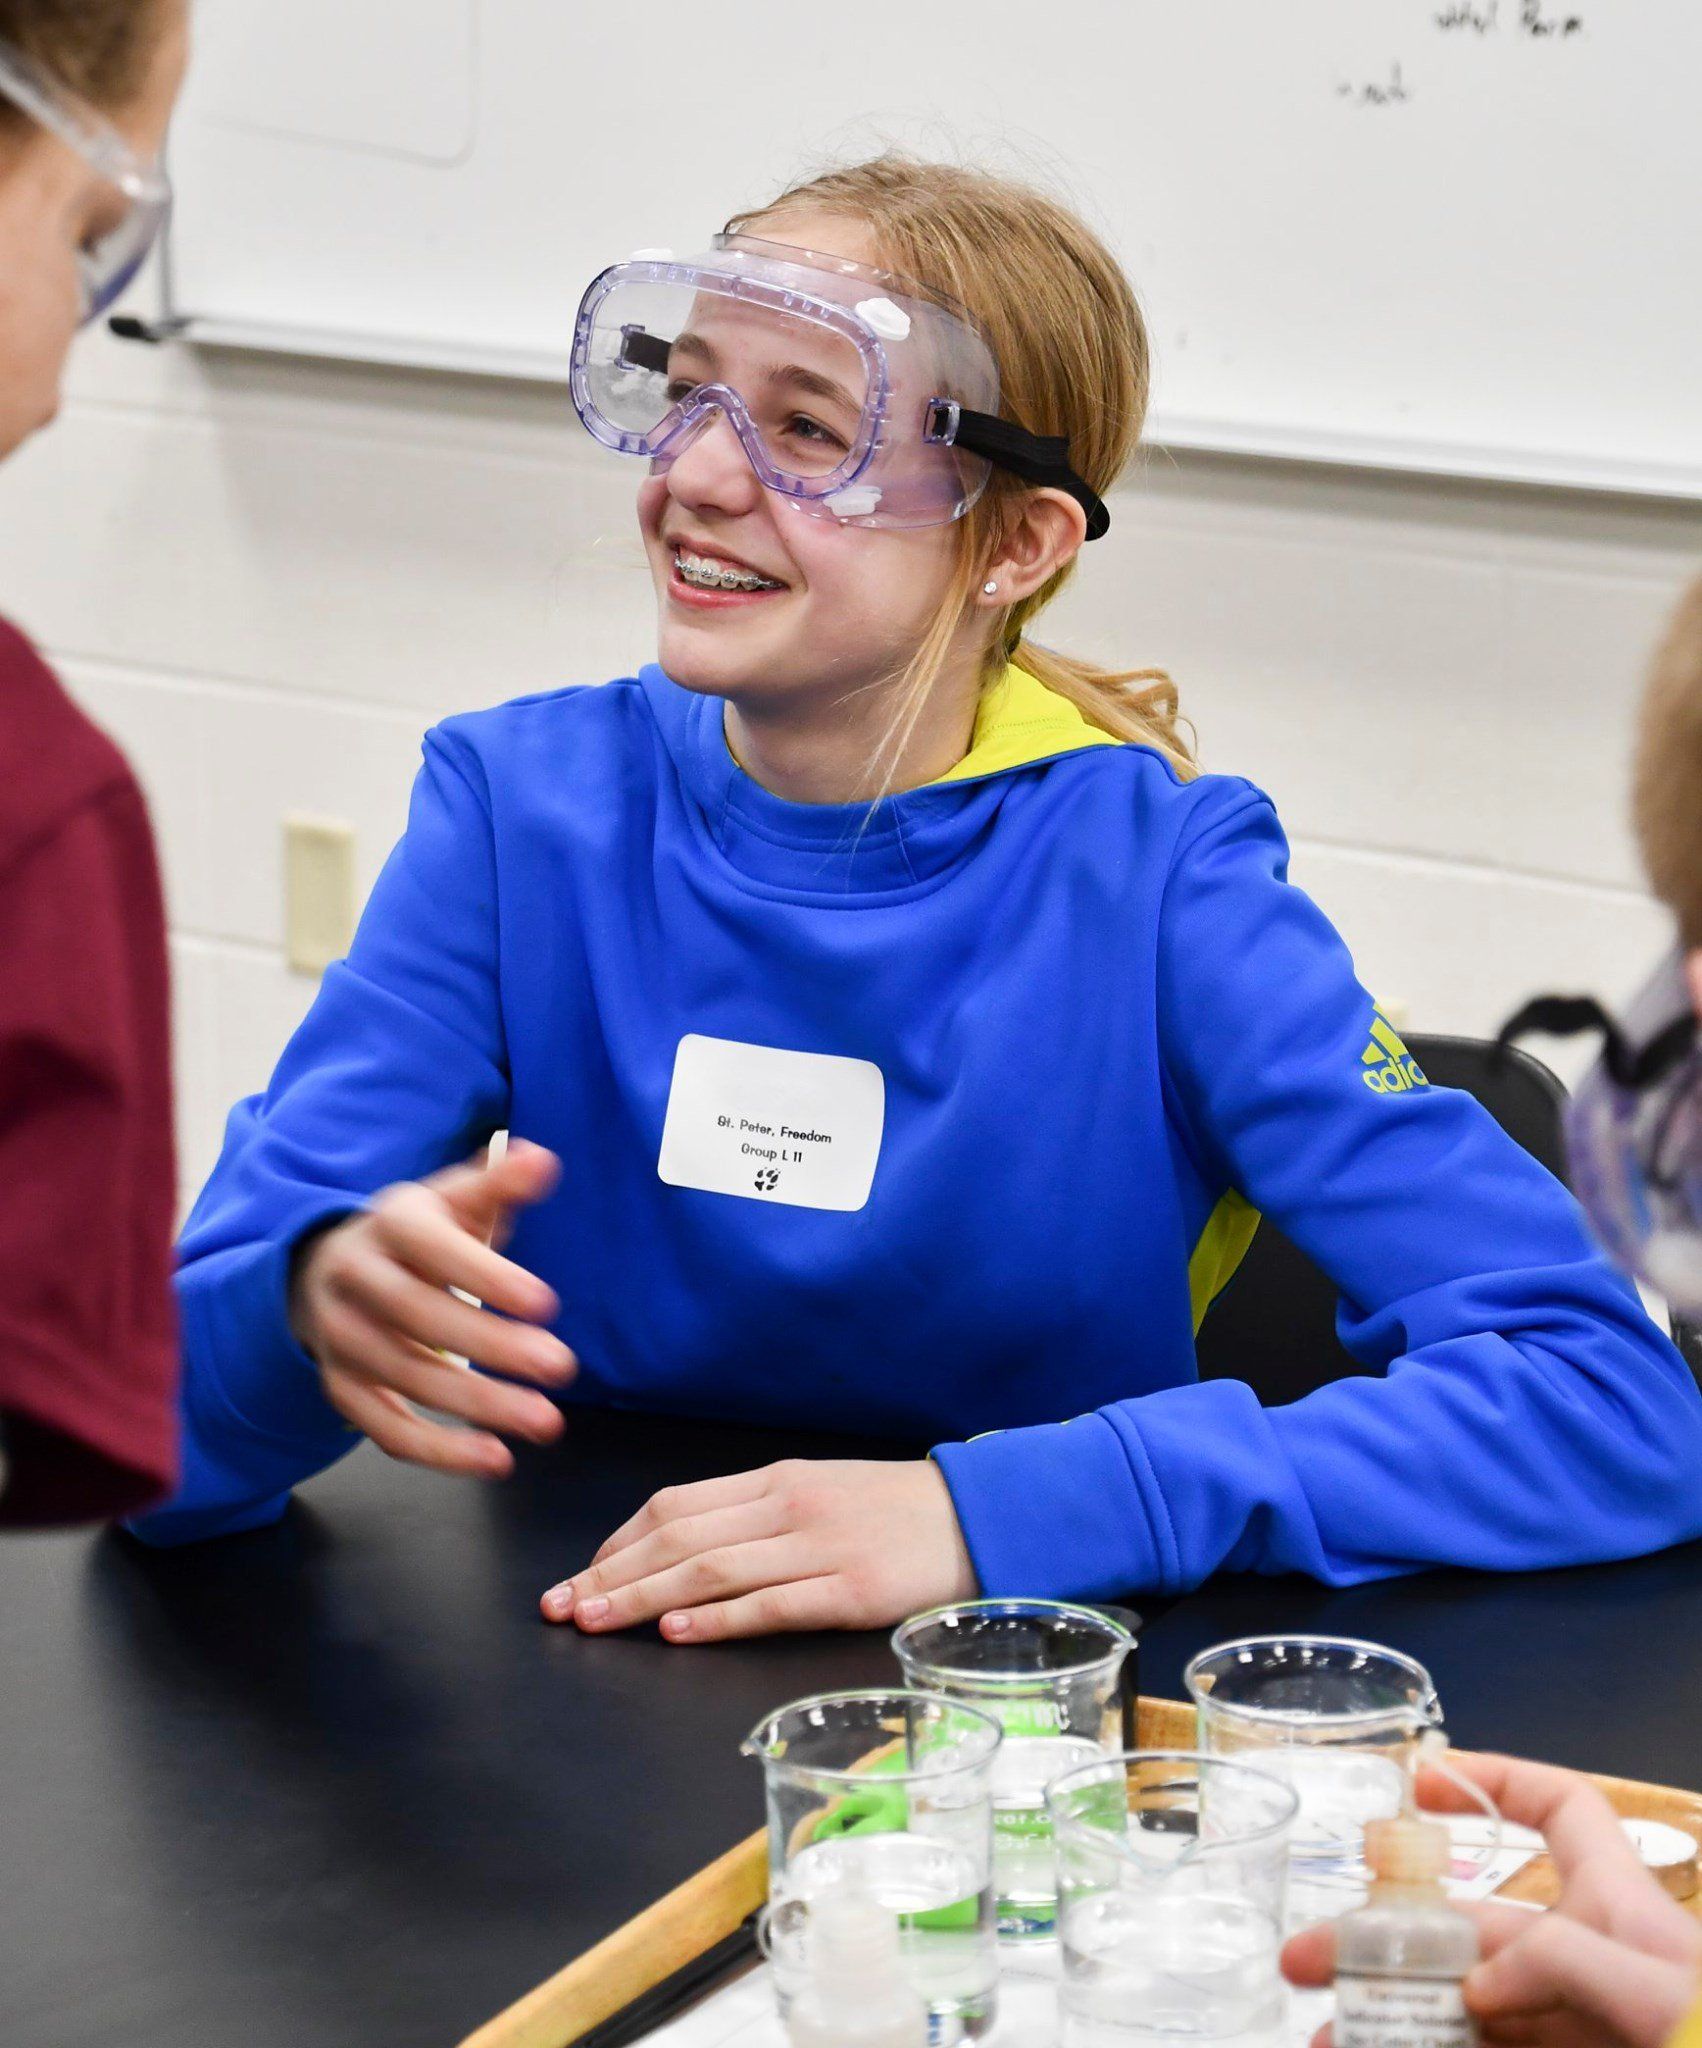 7th Grade students get some hands-on experience in the science lab at the high school